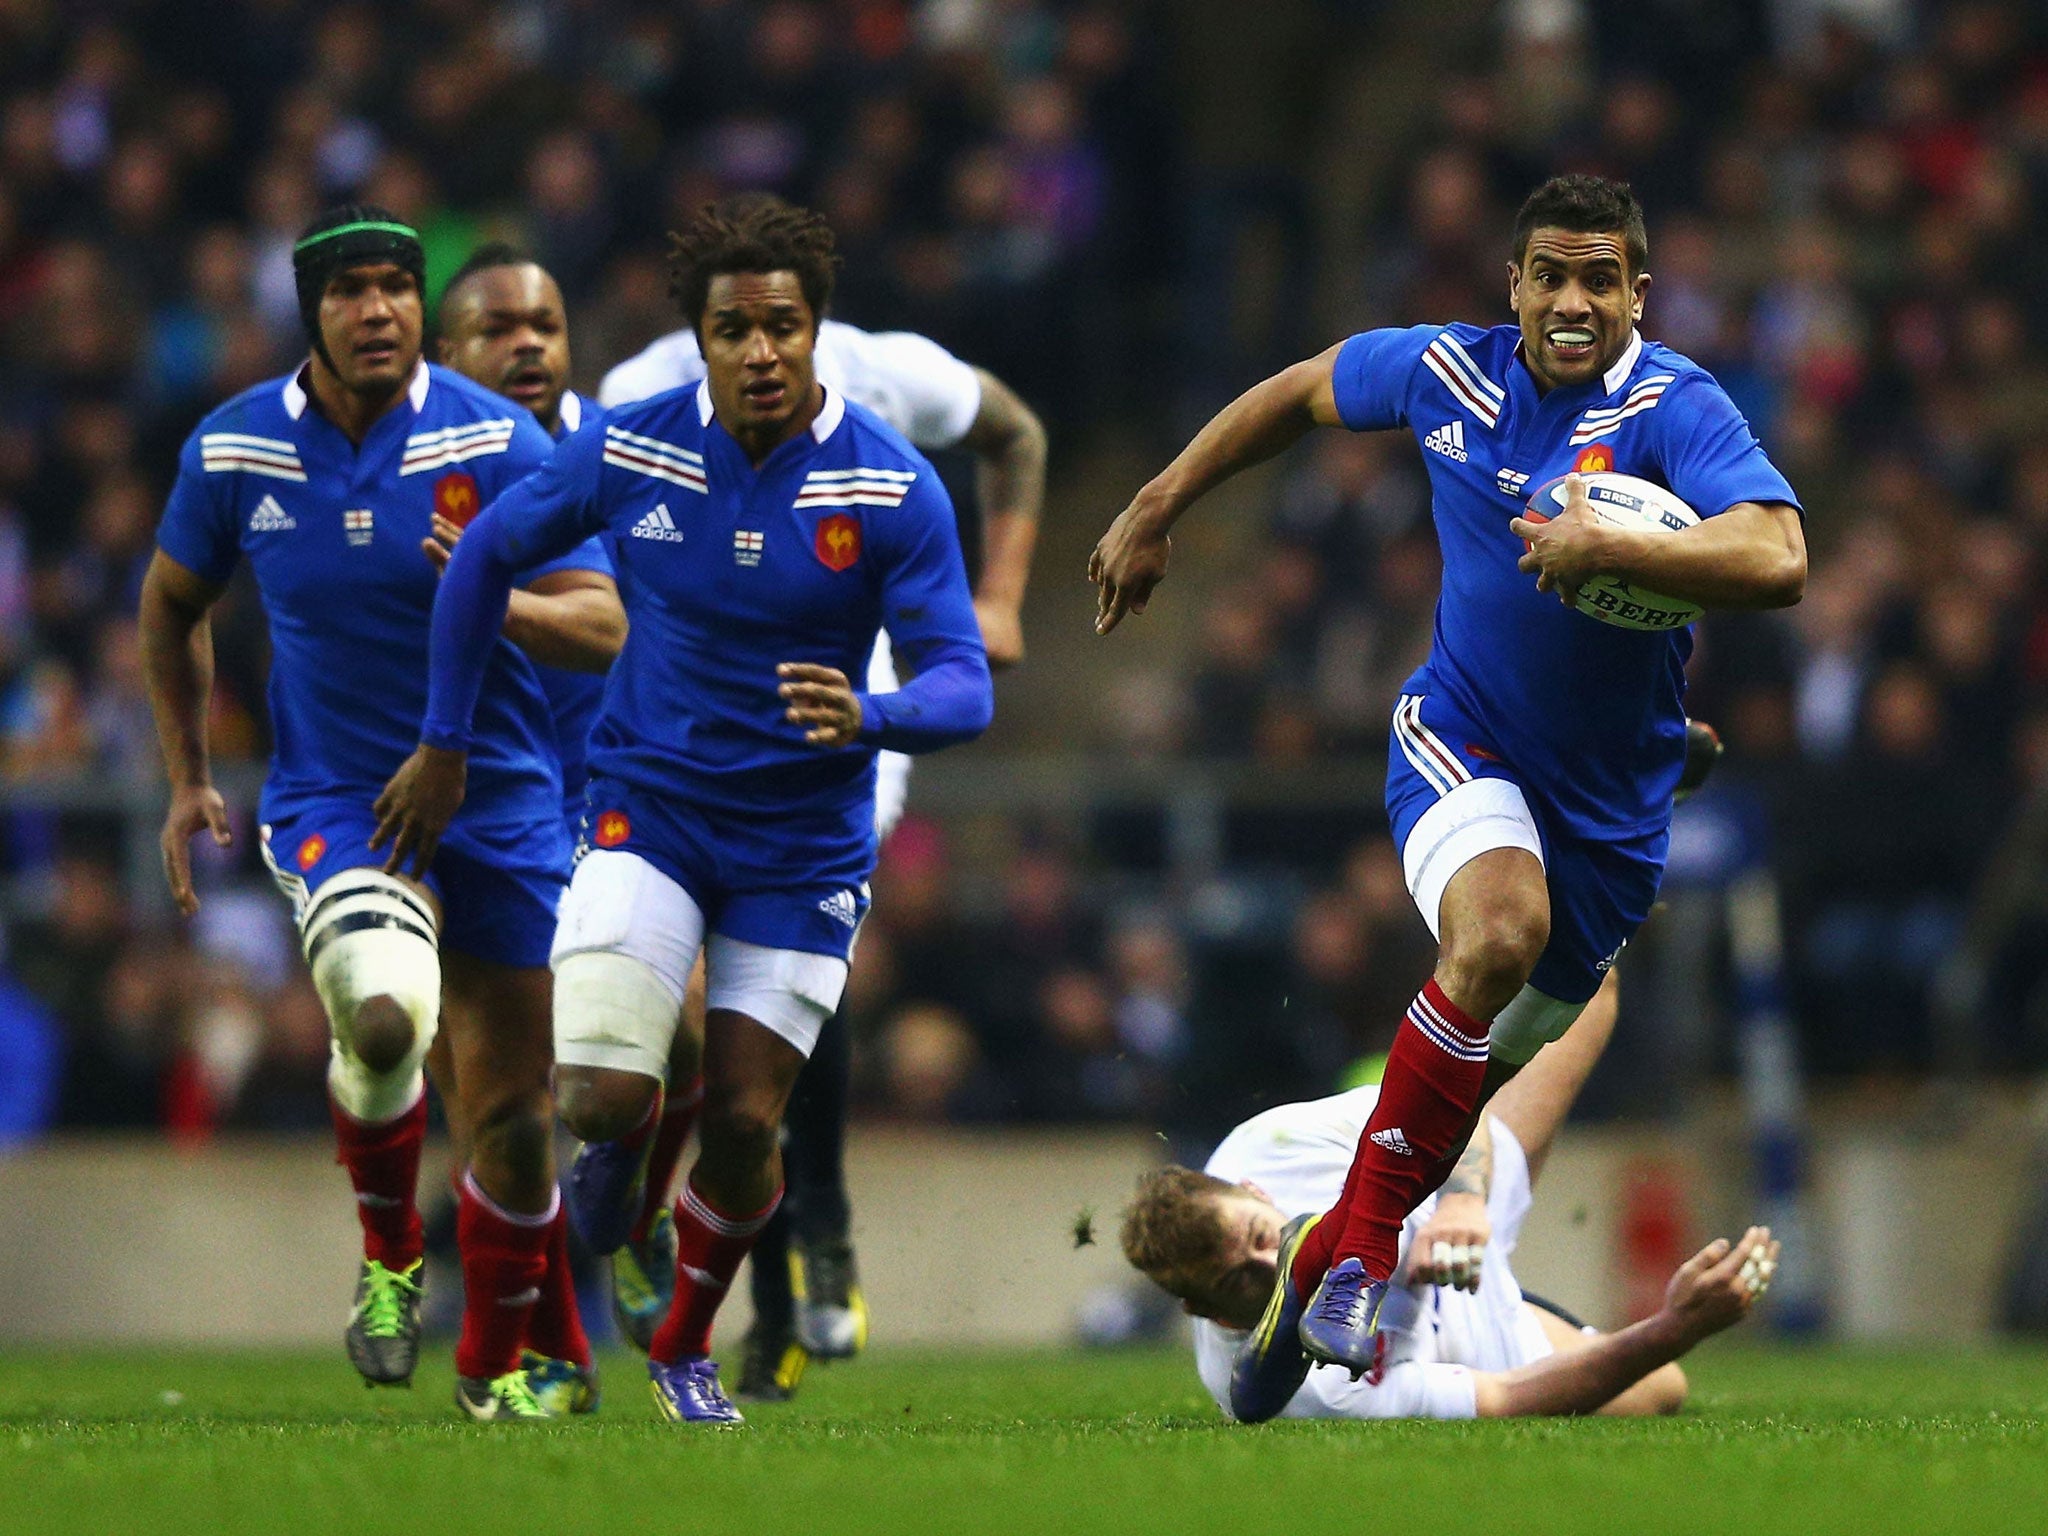 Twickers flicker: Wesley Fofana leaves France’s travails behind as he scores against England at Twickenham